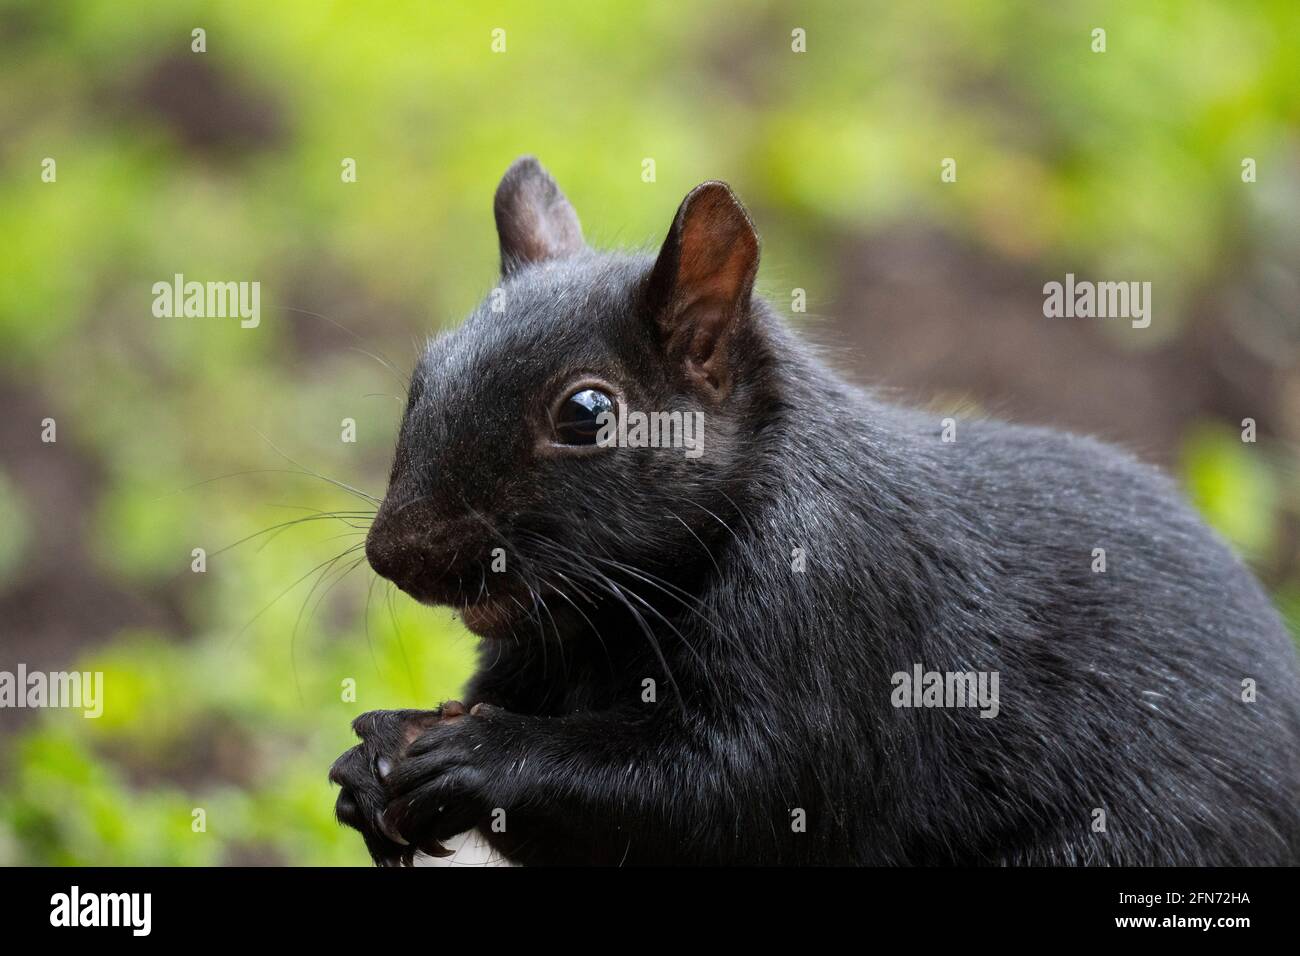 Close up of a Black Squirrel Stock Photo